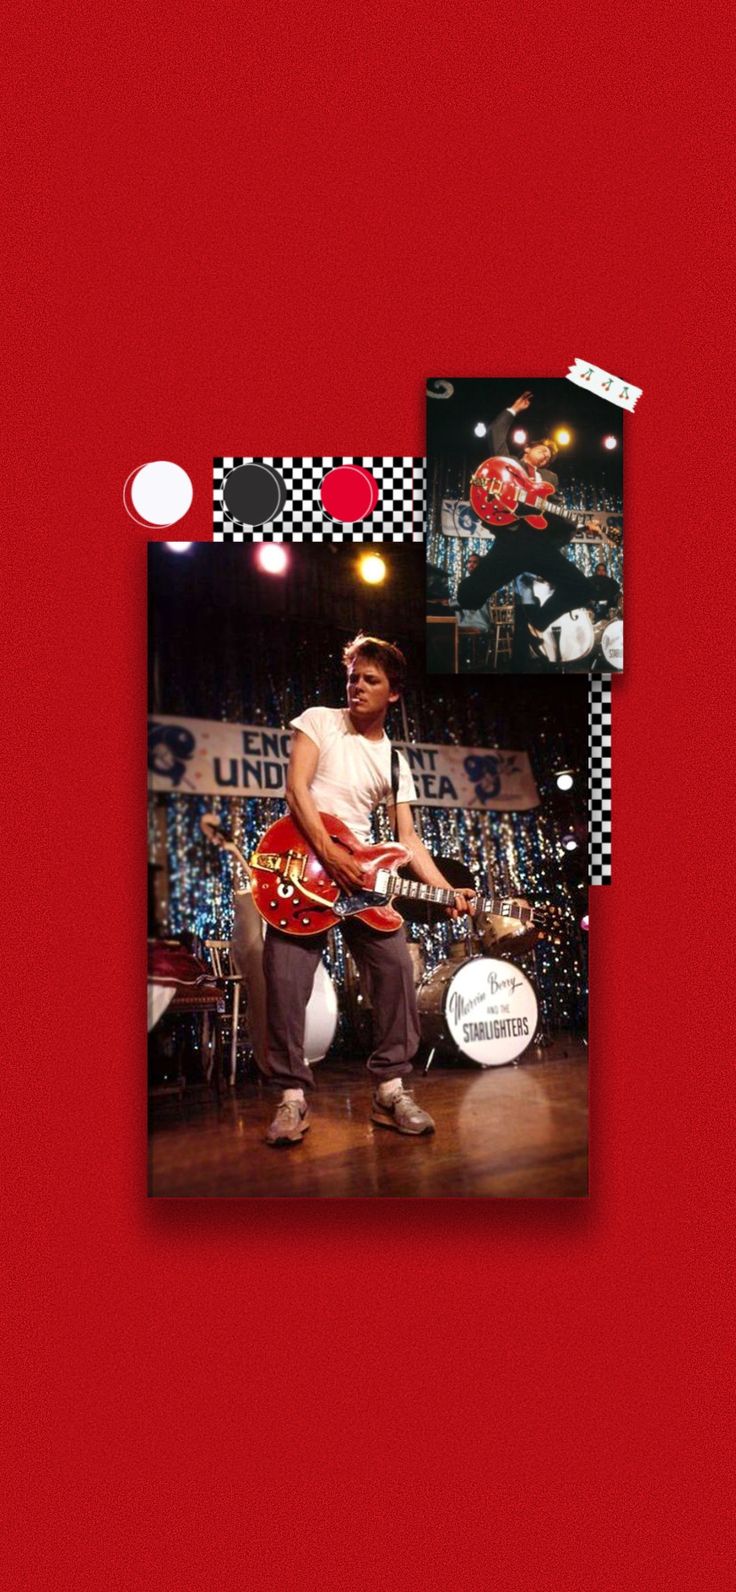 marty mcfly red aesthetic wallpaper 50s. Future wallpaper, Wallpaper, 80s retro